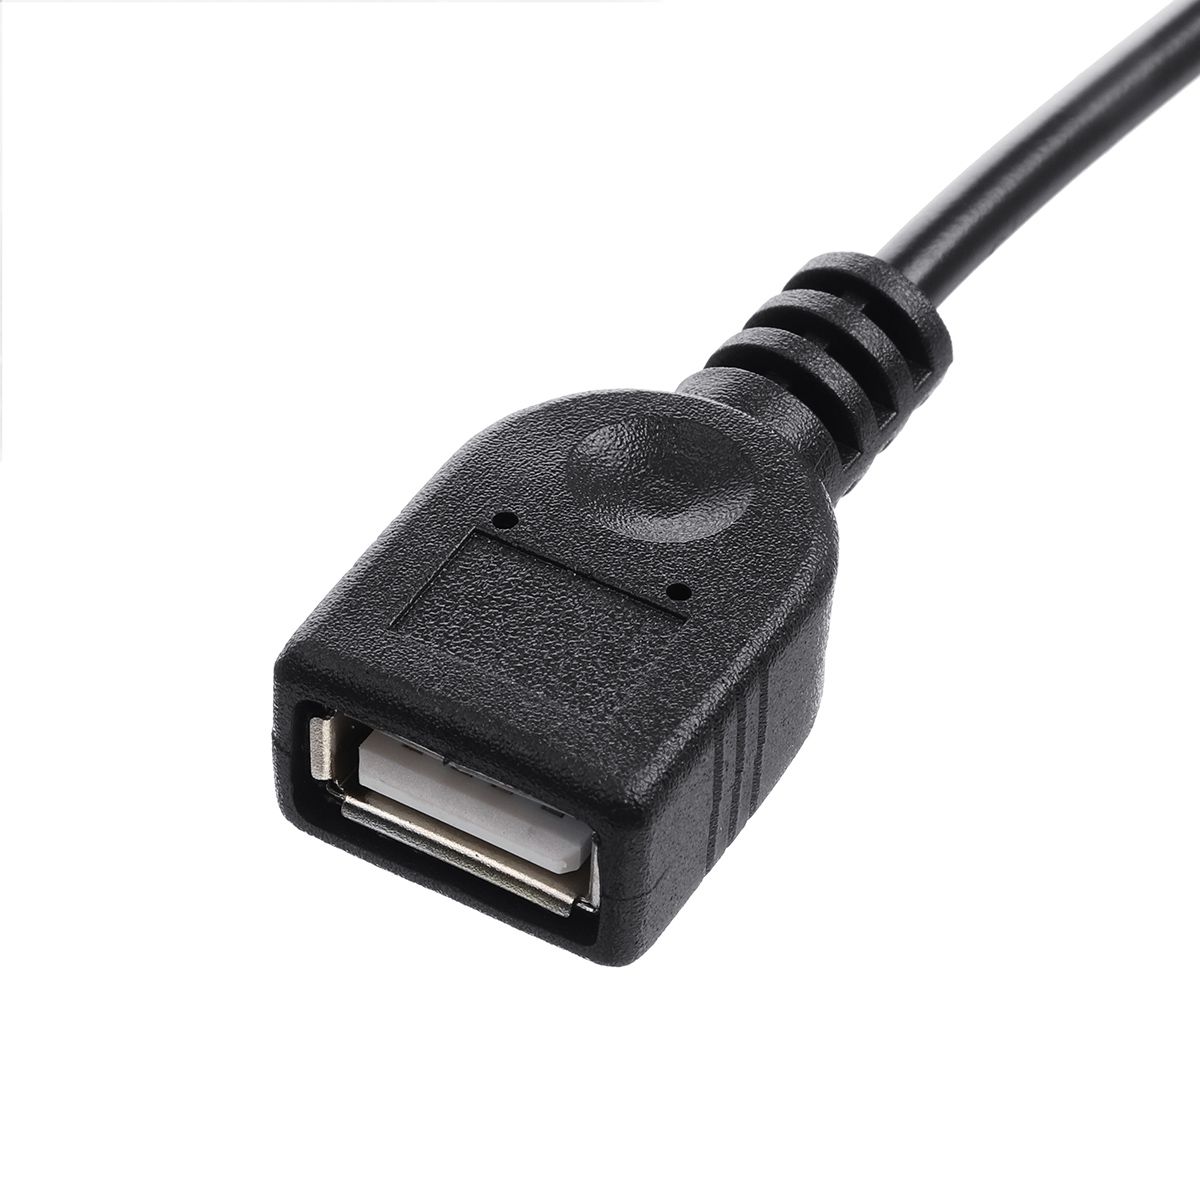 12CM-DC-Power-Plug-5521mm-To-USB--20-A-Female-Supply-Cord-Extension-Cable-1633350